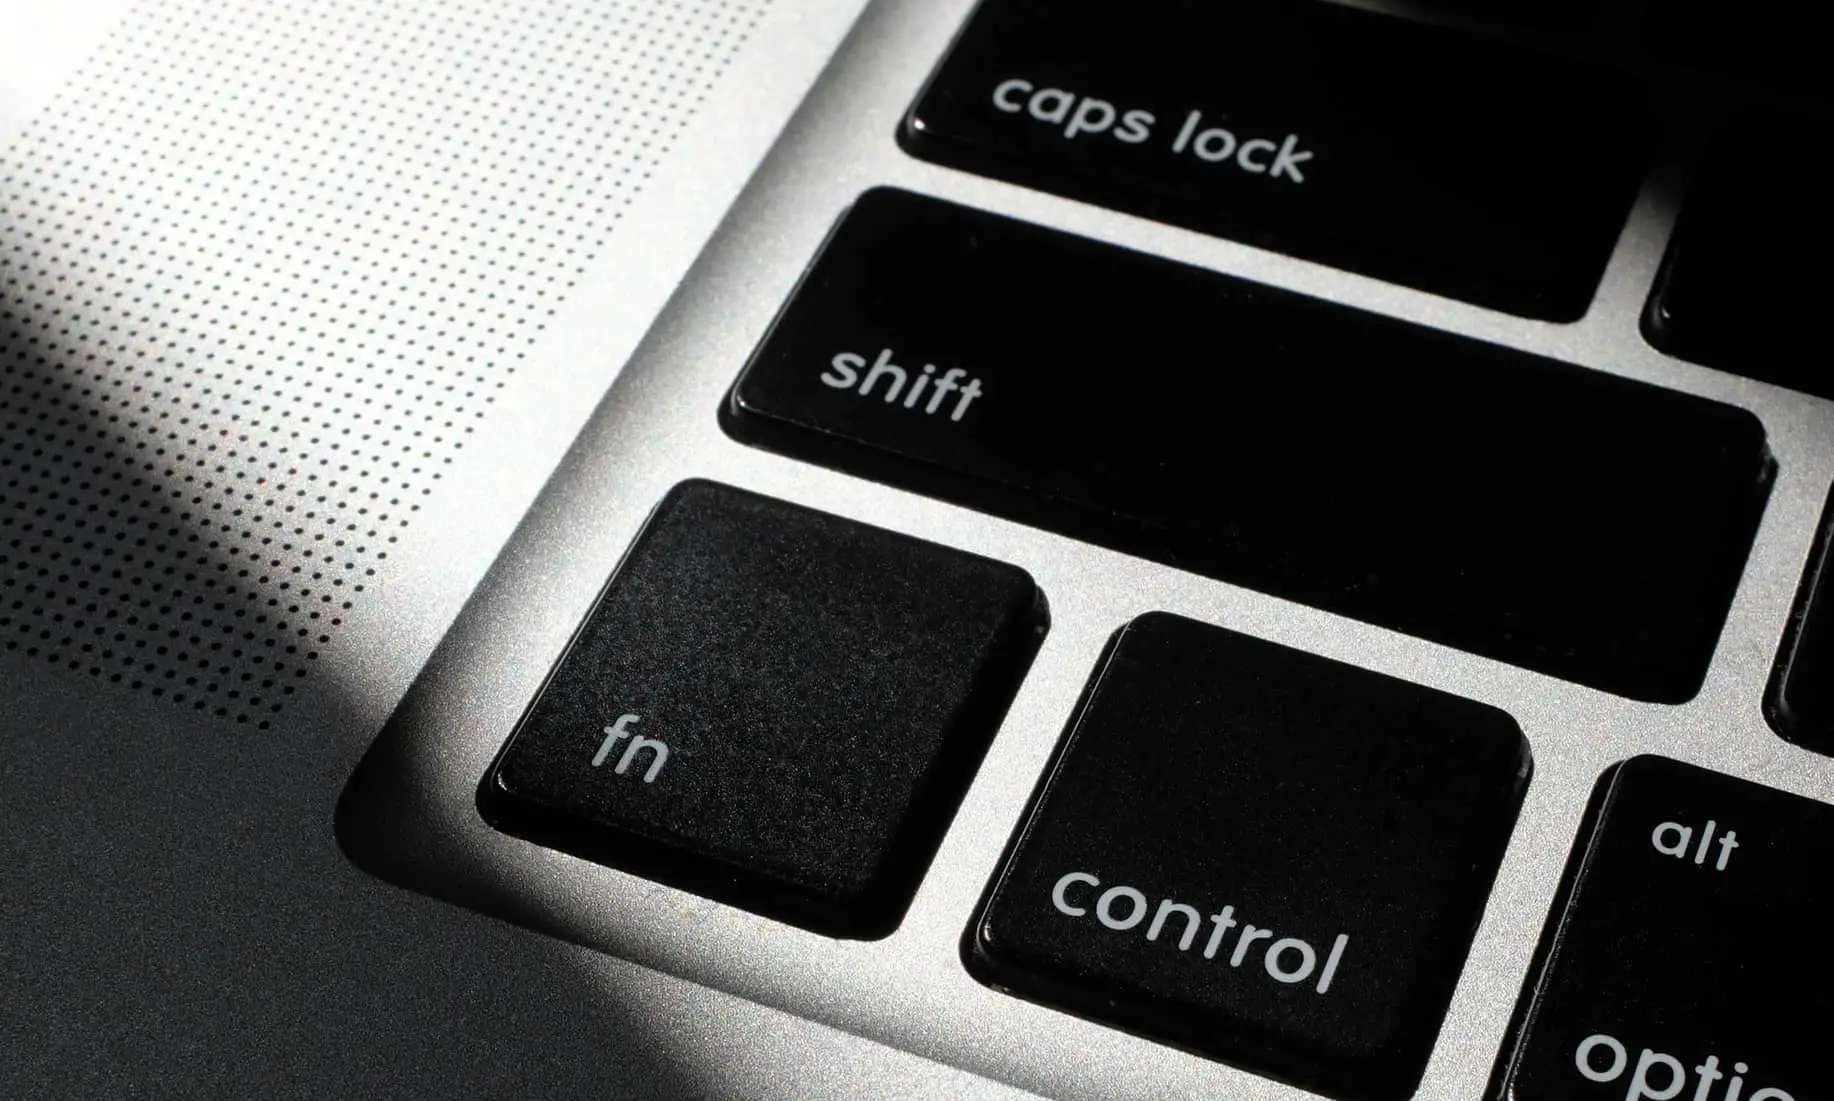 Laptop keyboard showing shift caps lock and control buttons